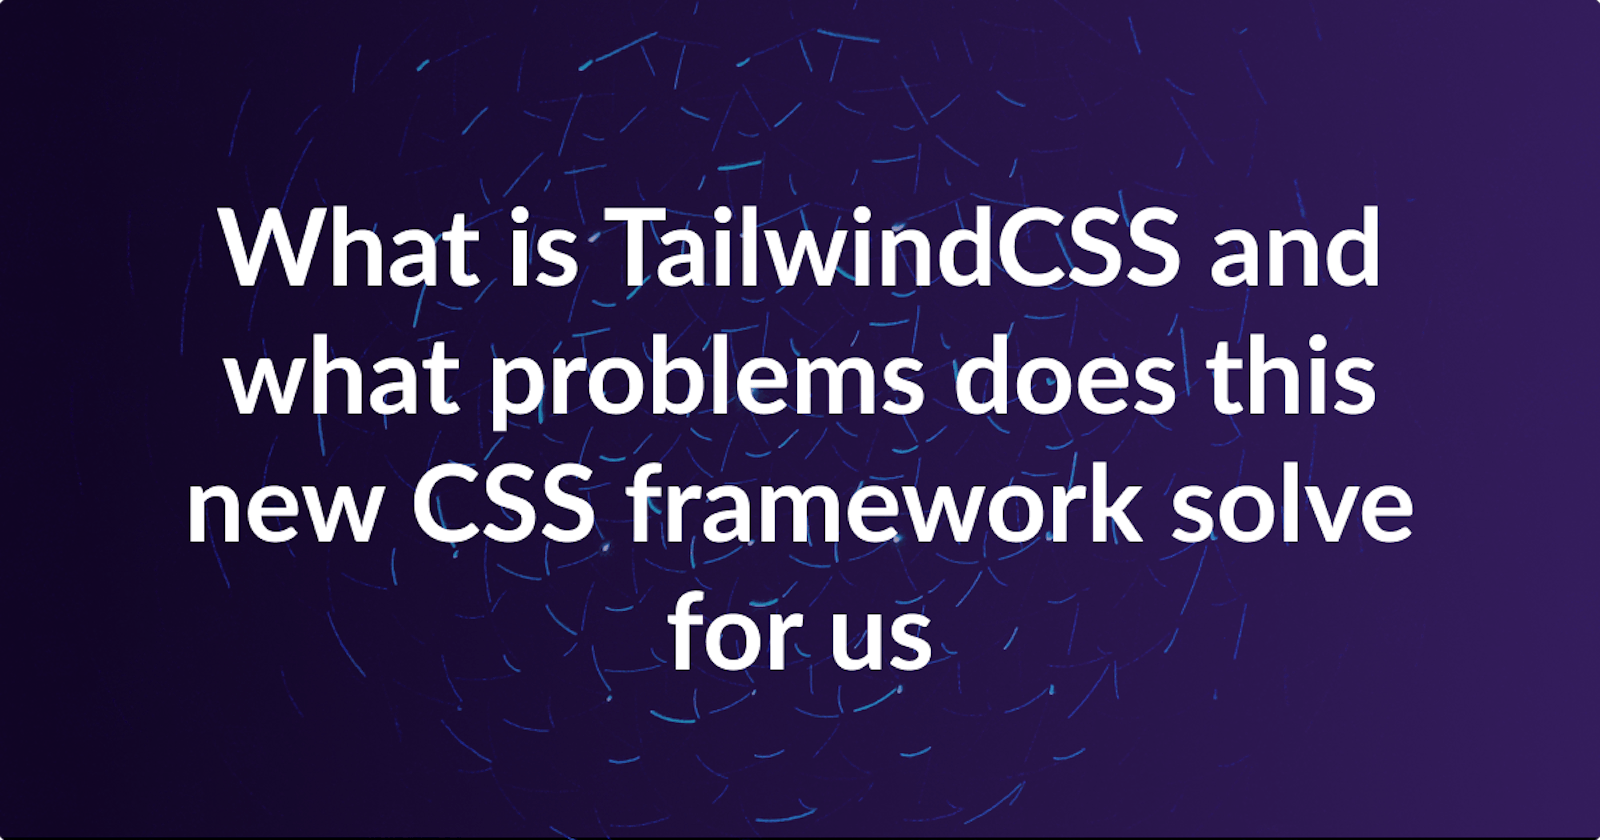 What is TailwindCSS and what problems does this new CSS framework solve for us